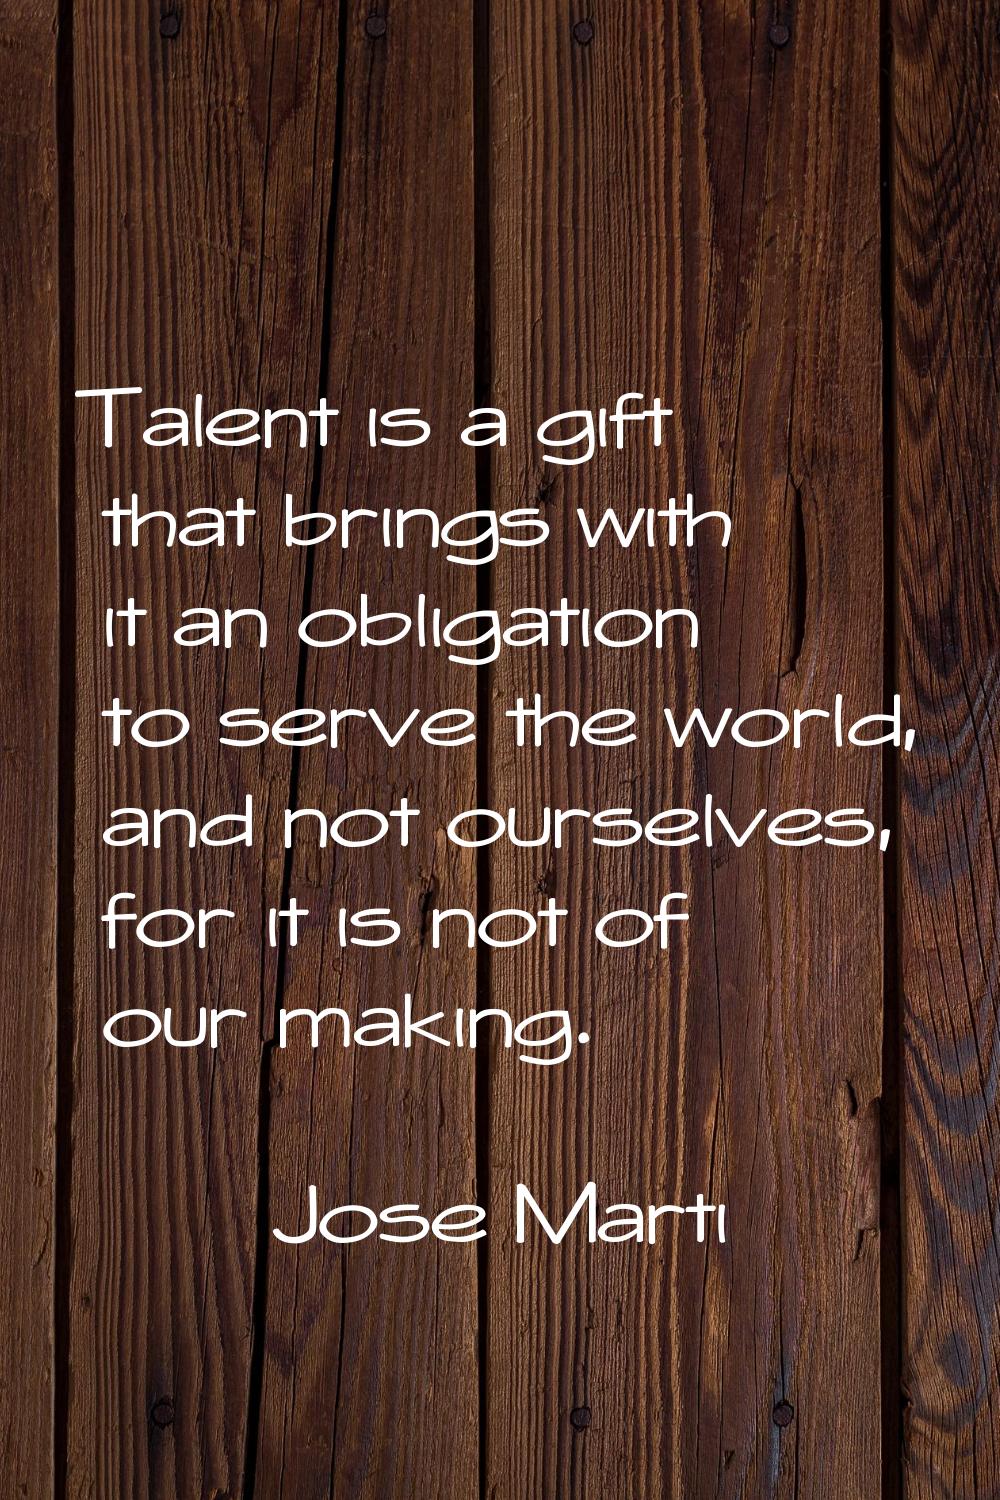 Talent is a gift that brings with it an obligation to serve the world, and not ourselves, for it is